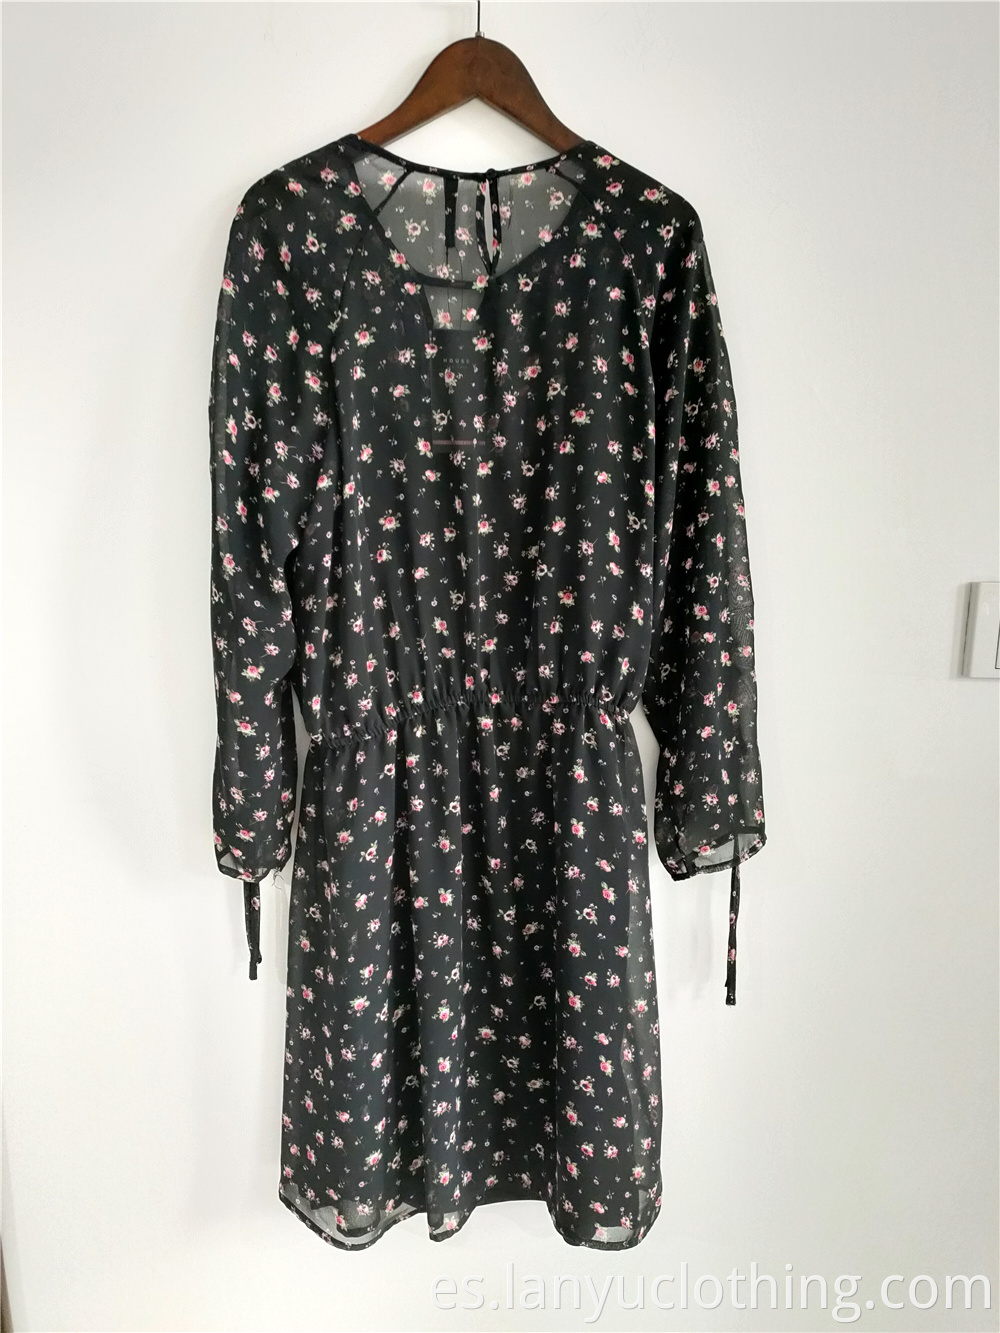 Women's Black Floral Chiffon Dress With Long Sleeves